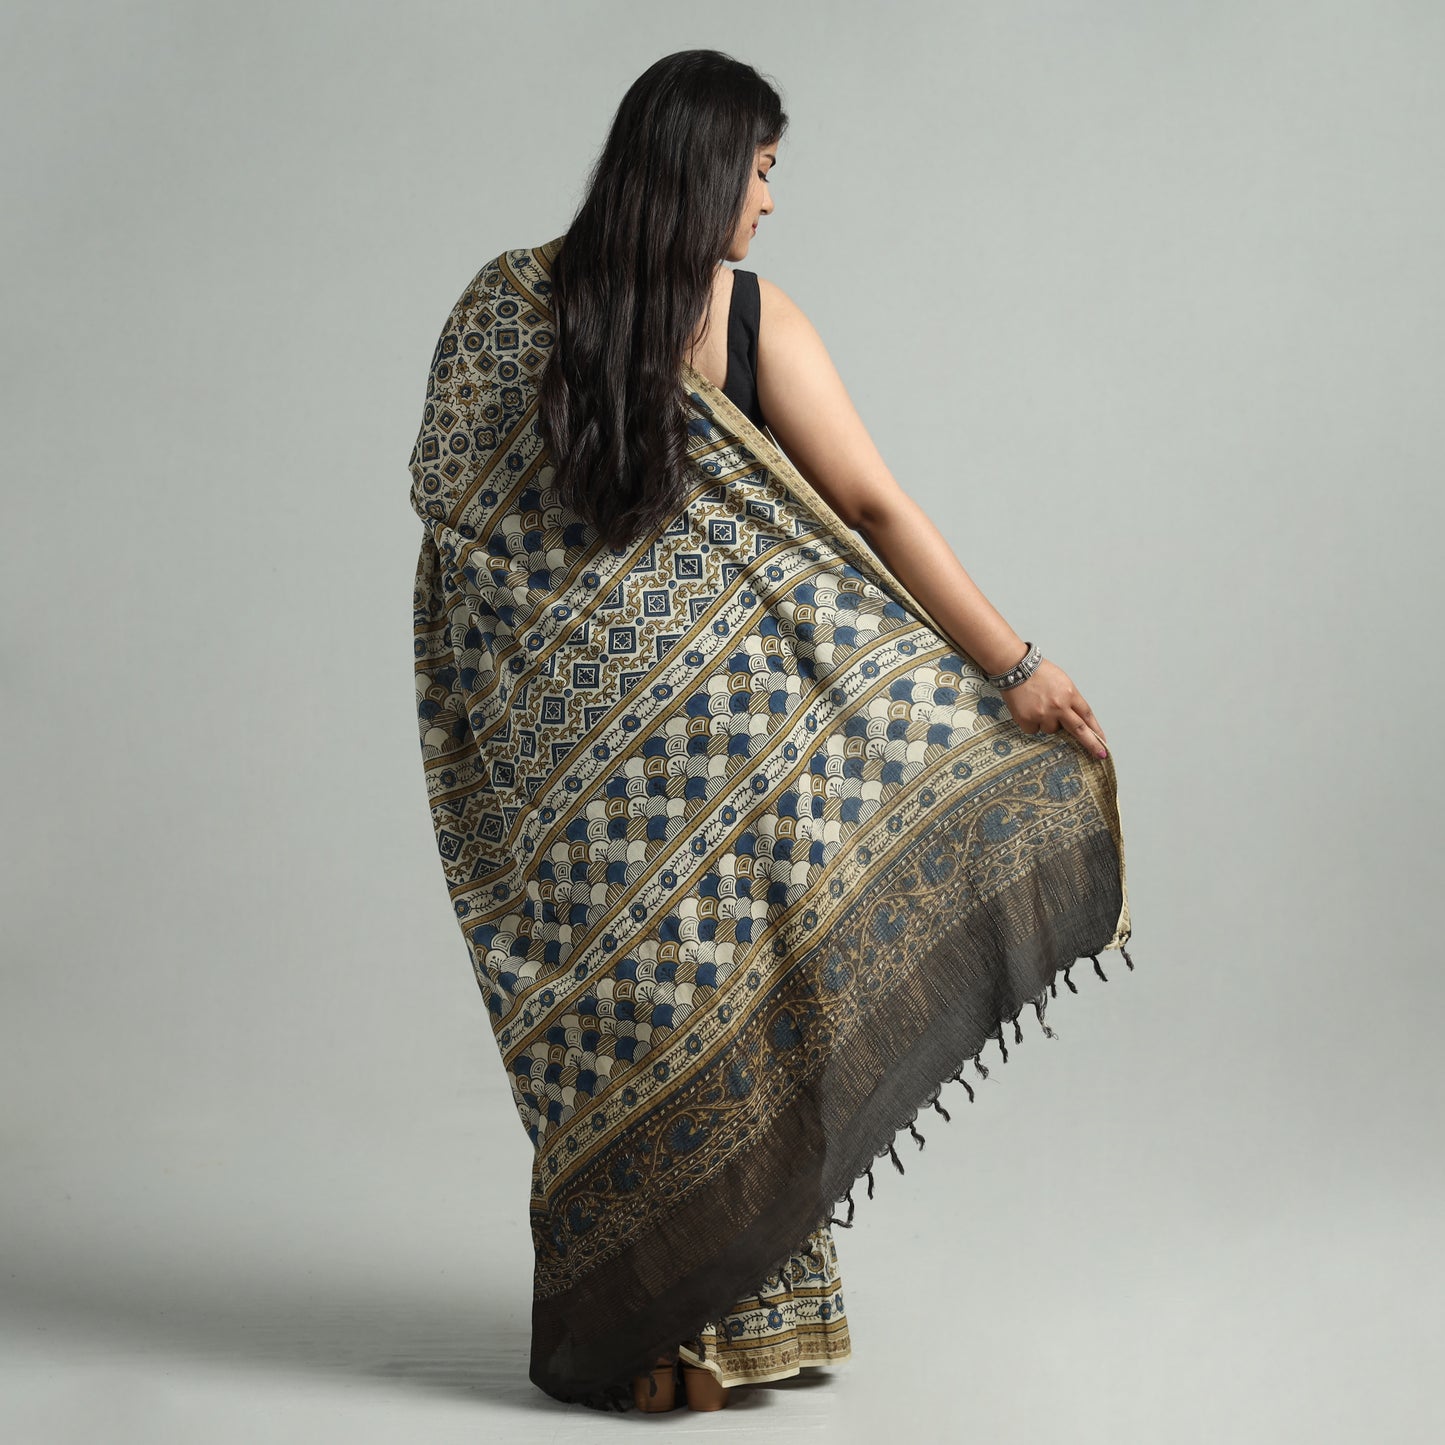 Beige - Ajrakh Block Printed Handloom Mul Cotton Natural Dyed Saree with Blouse Piece 01